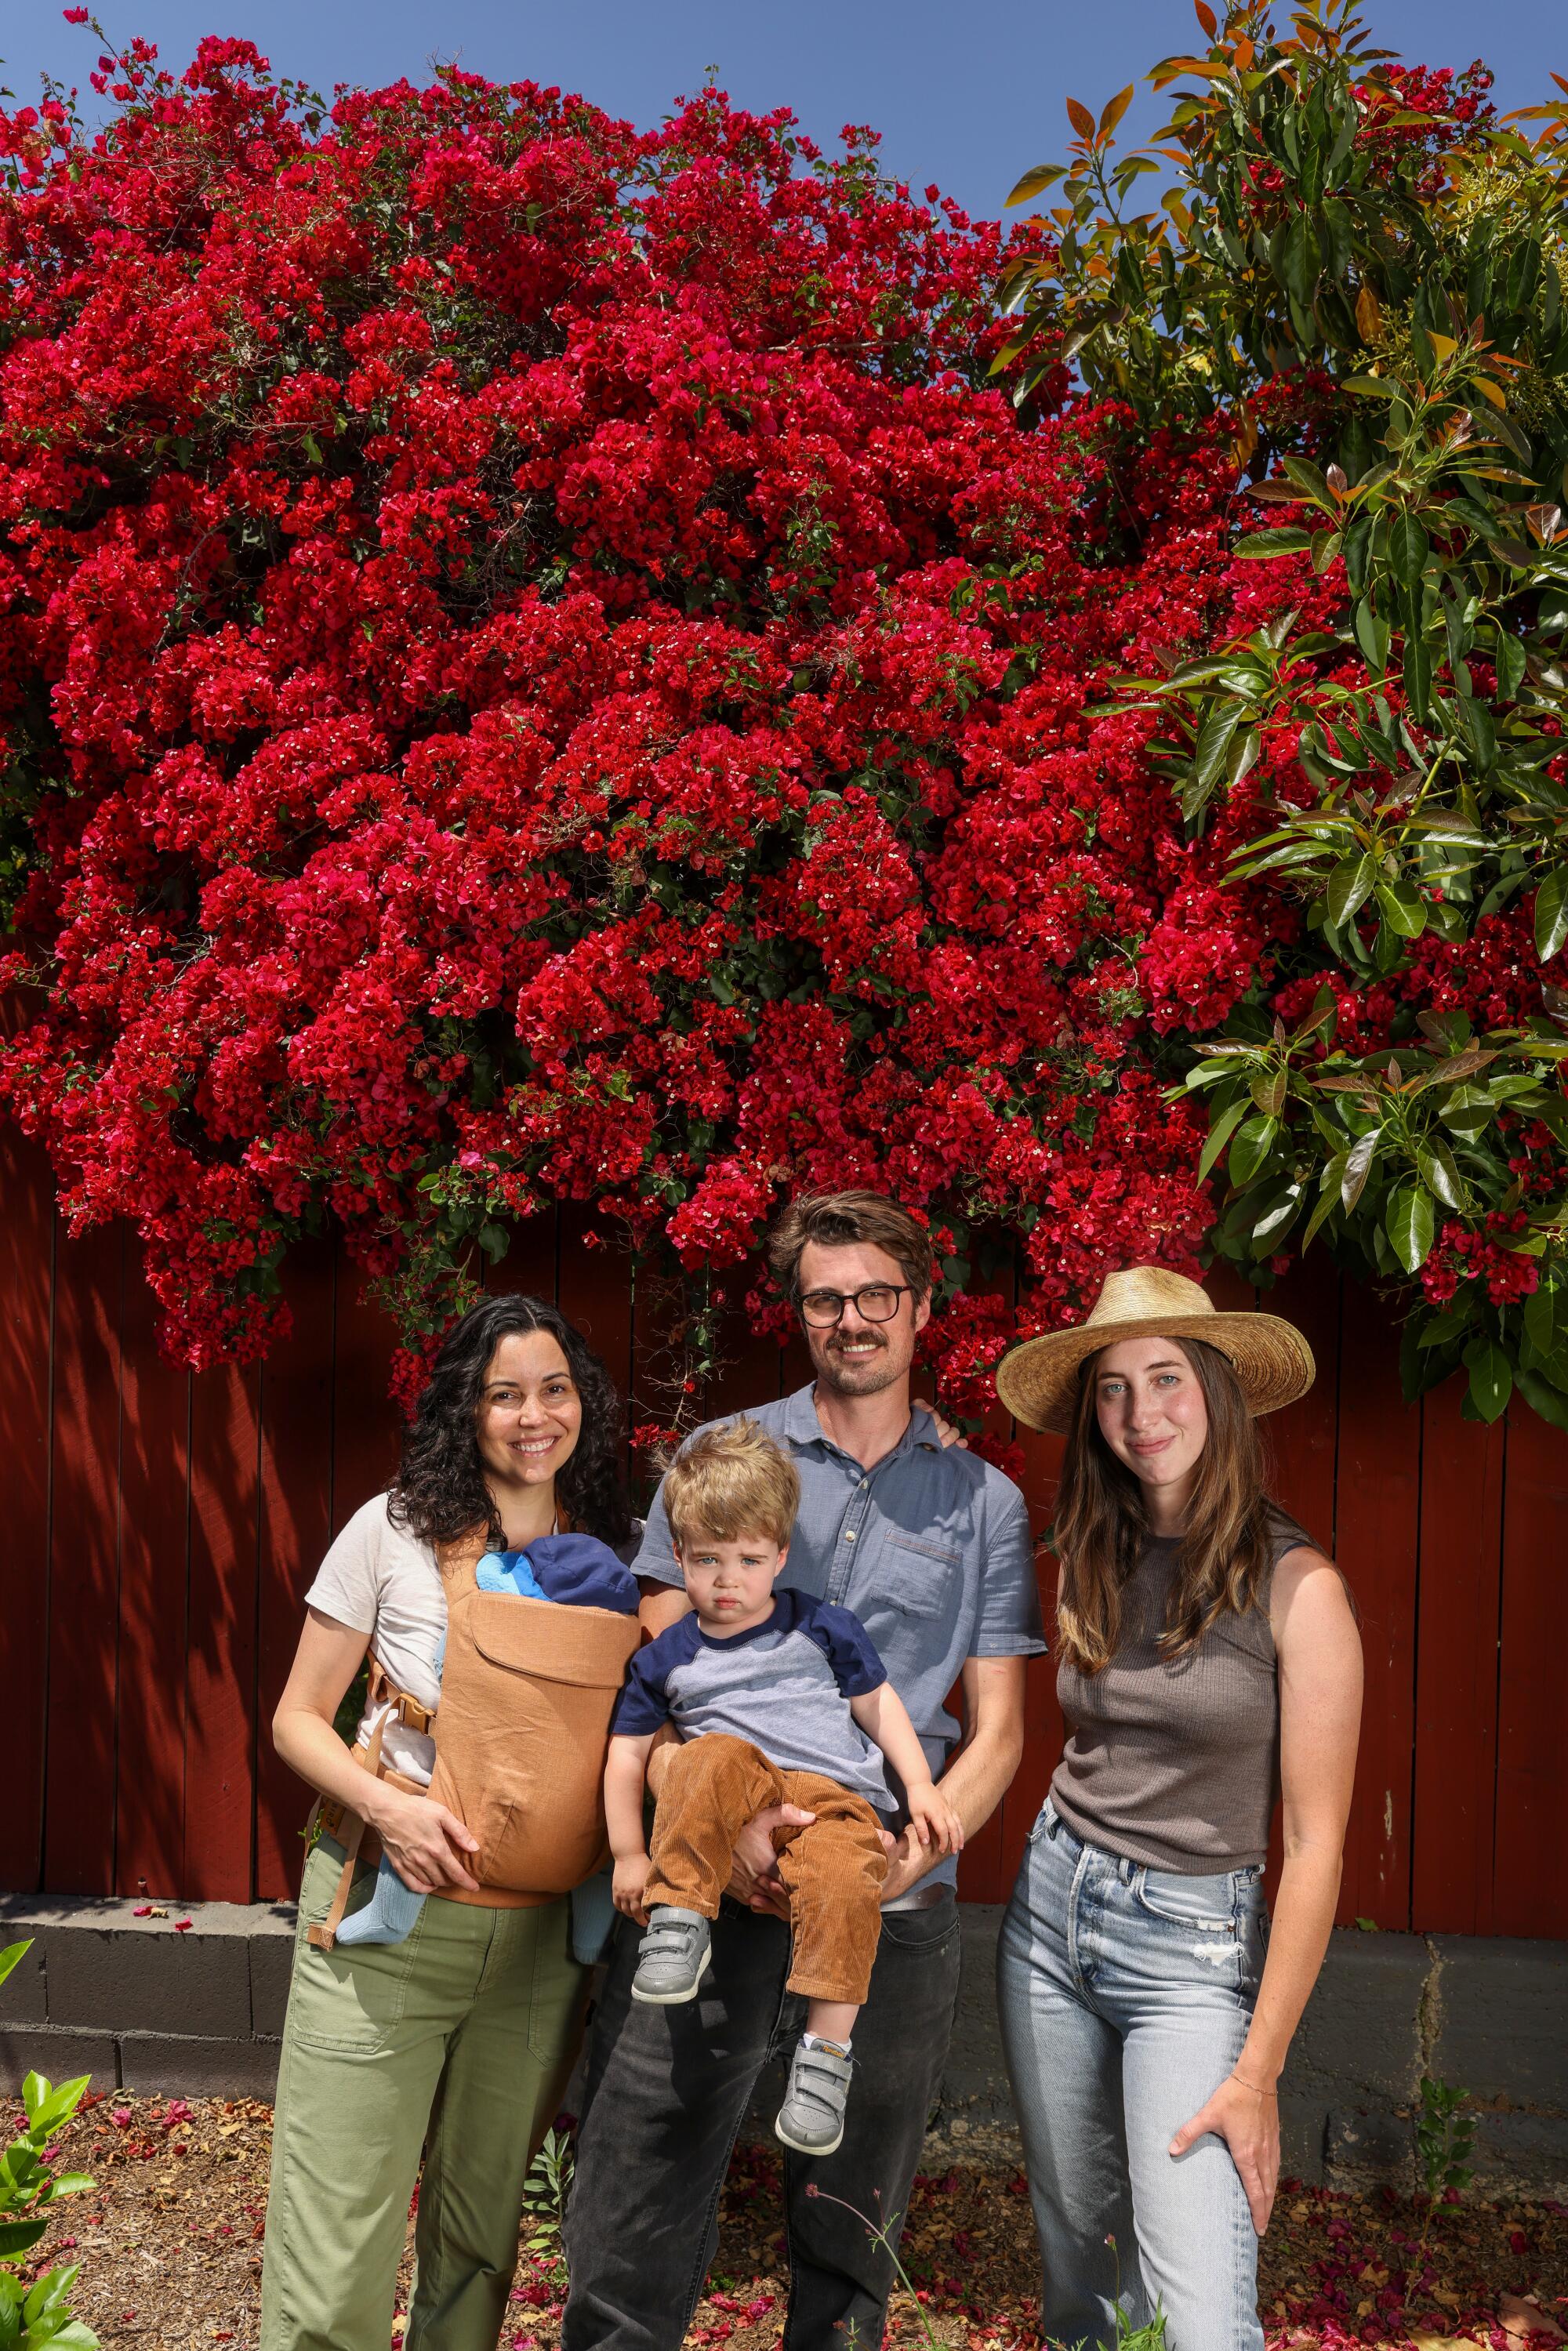 Two women, two children and a man represent a portrait in front of a large plant with red flowers.